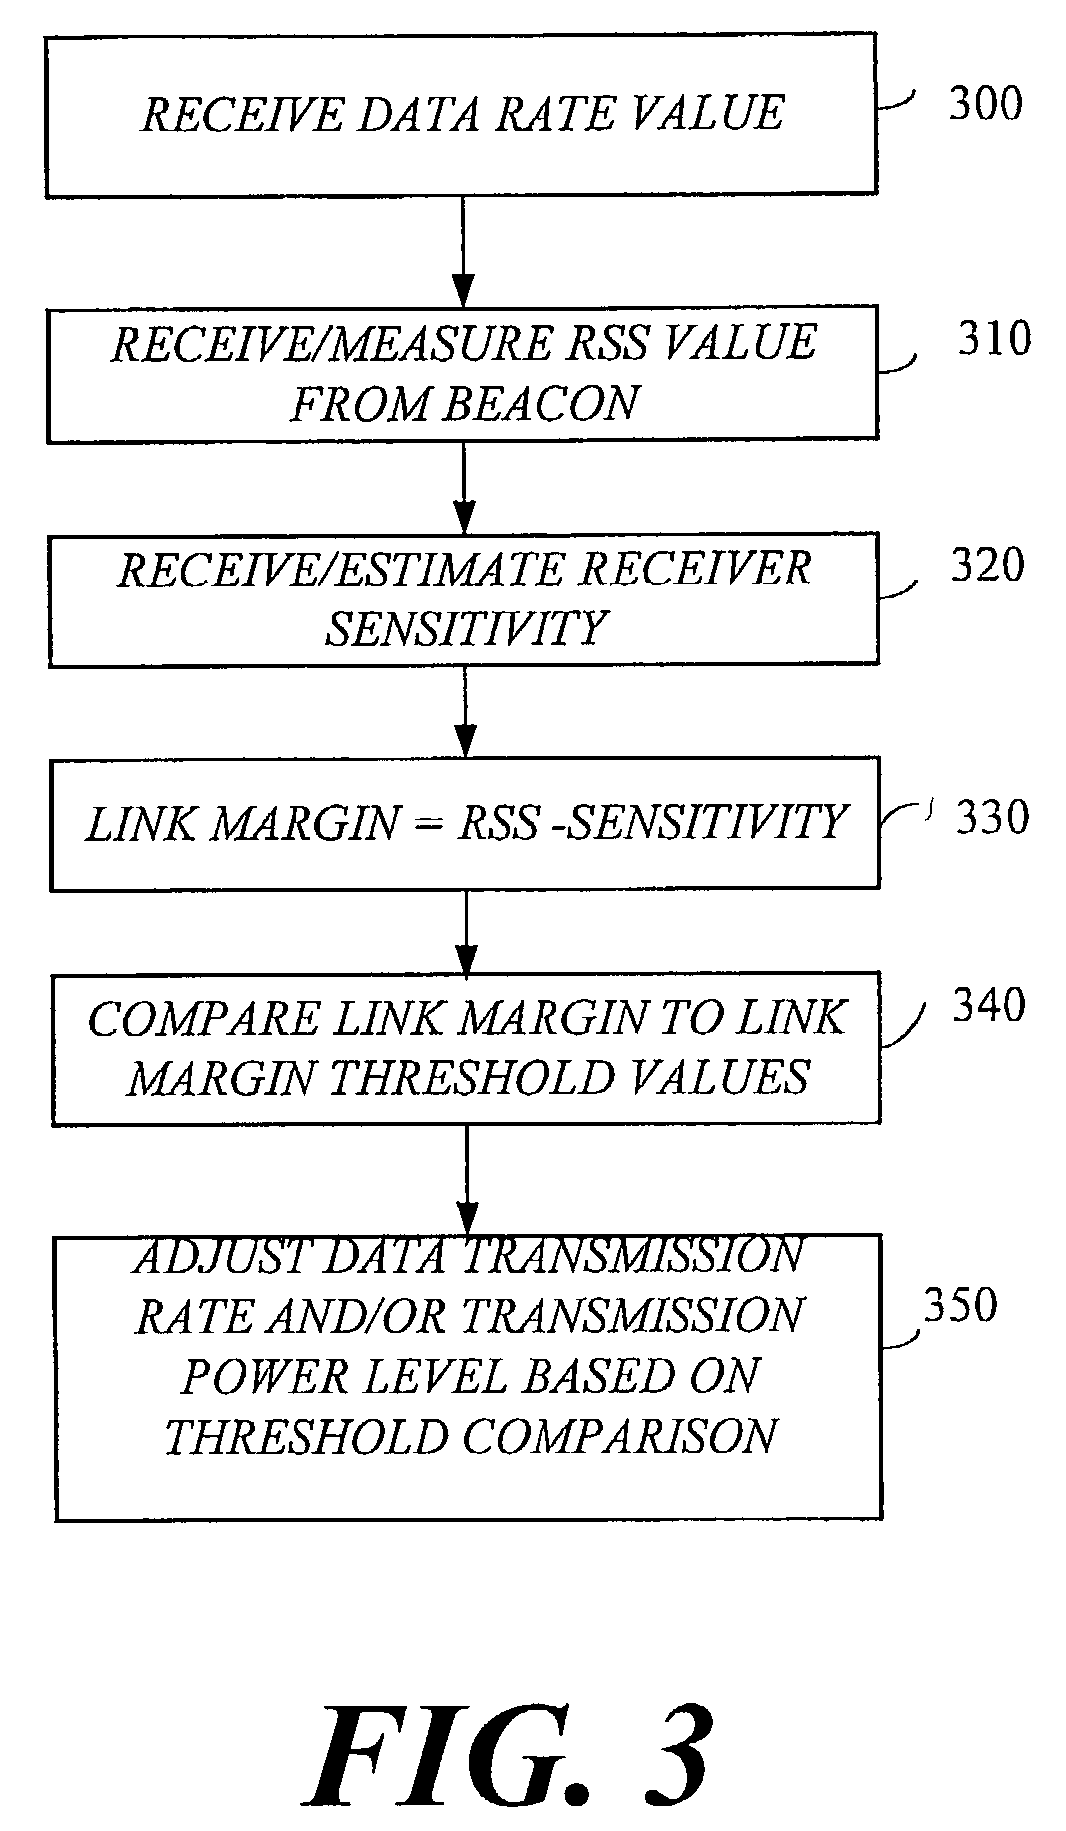 Method and apparatus to control transmitter